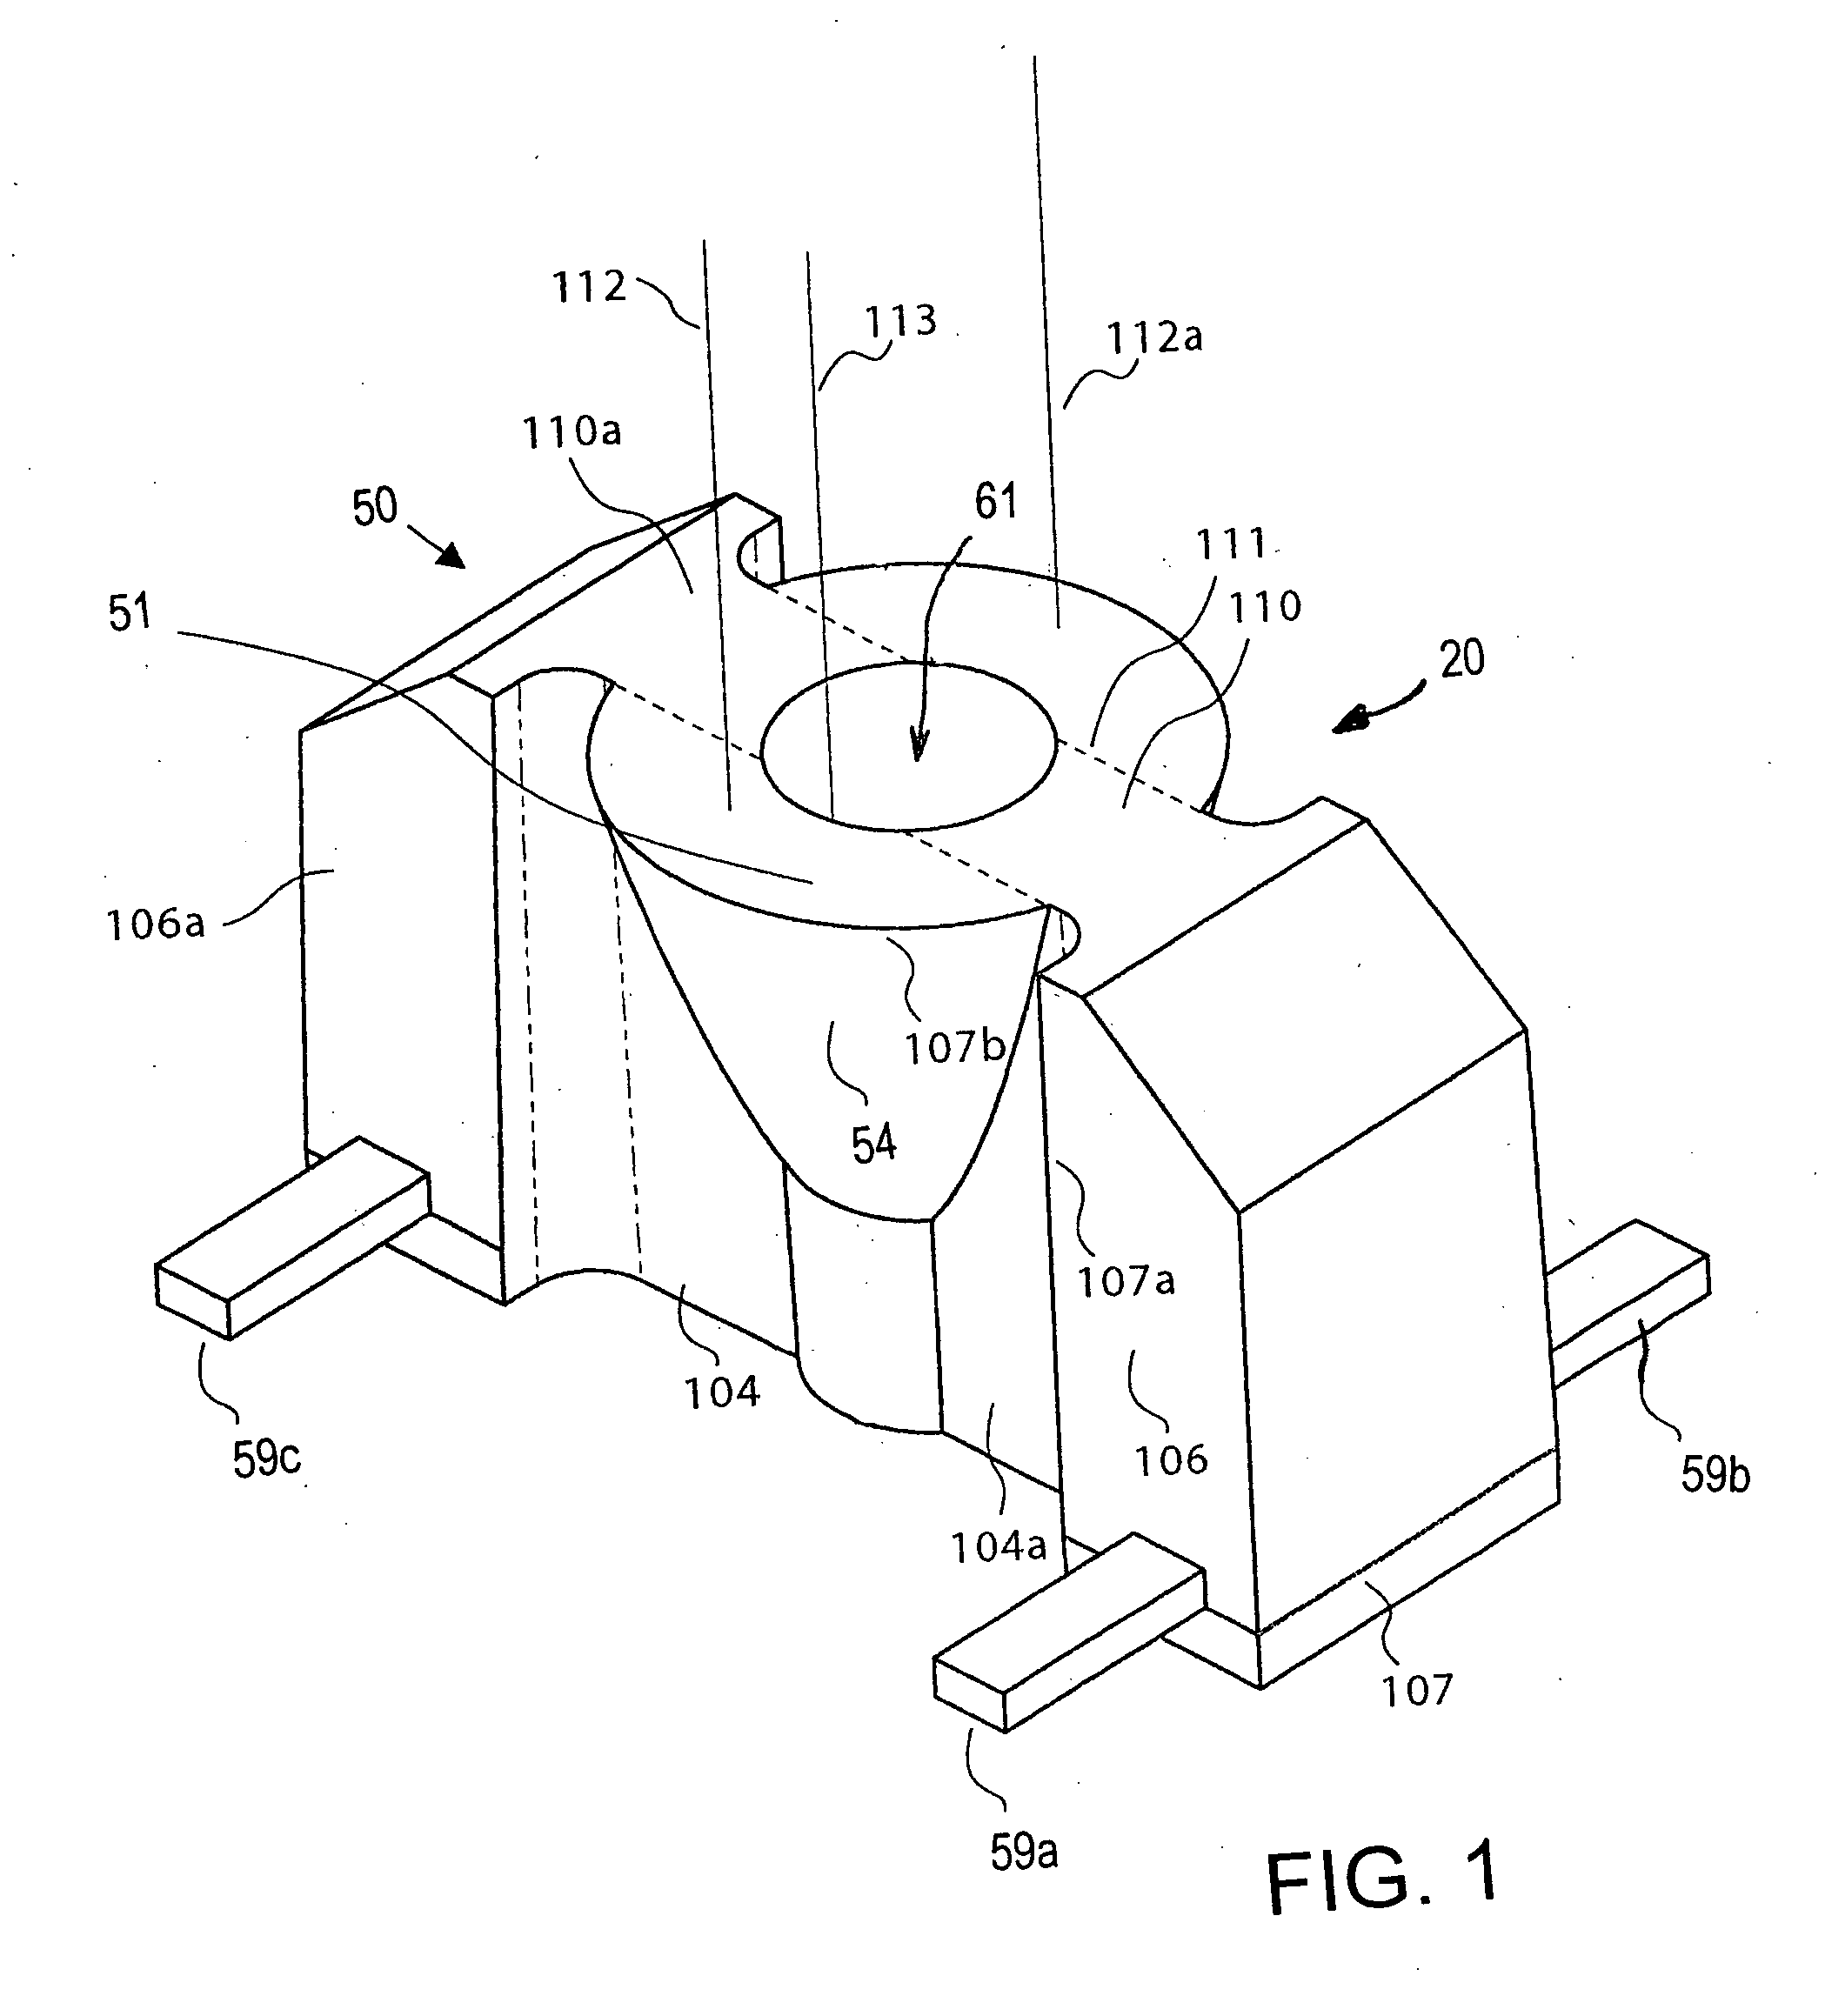 Dimmable rearview assembly having a glare sensor